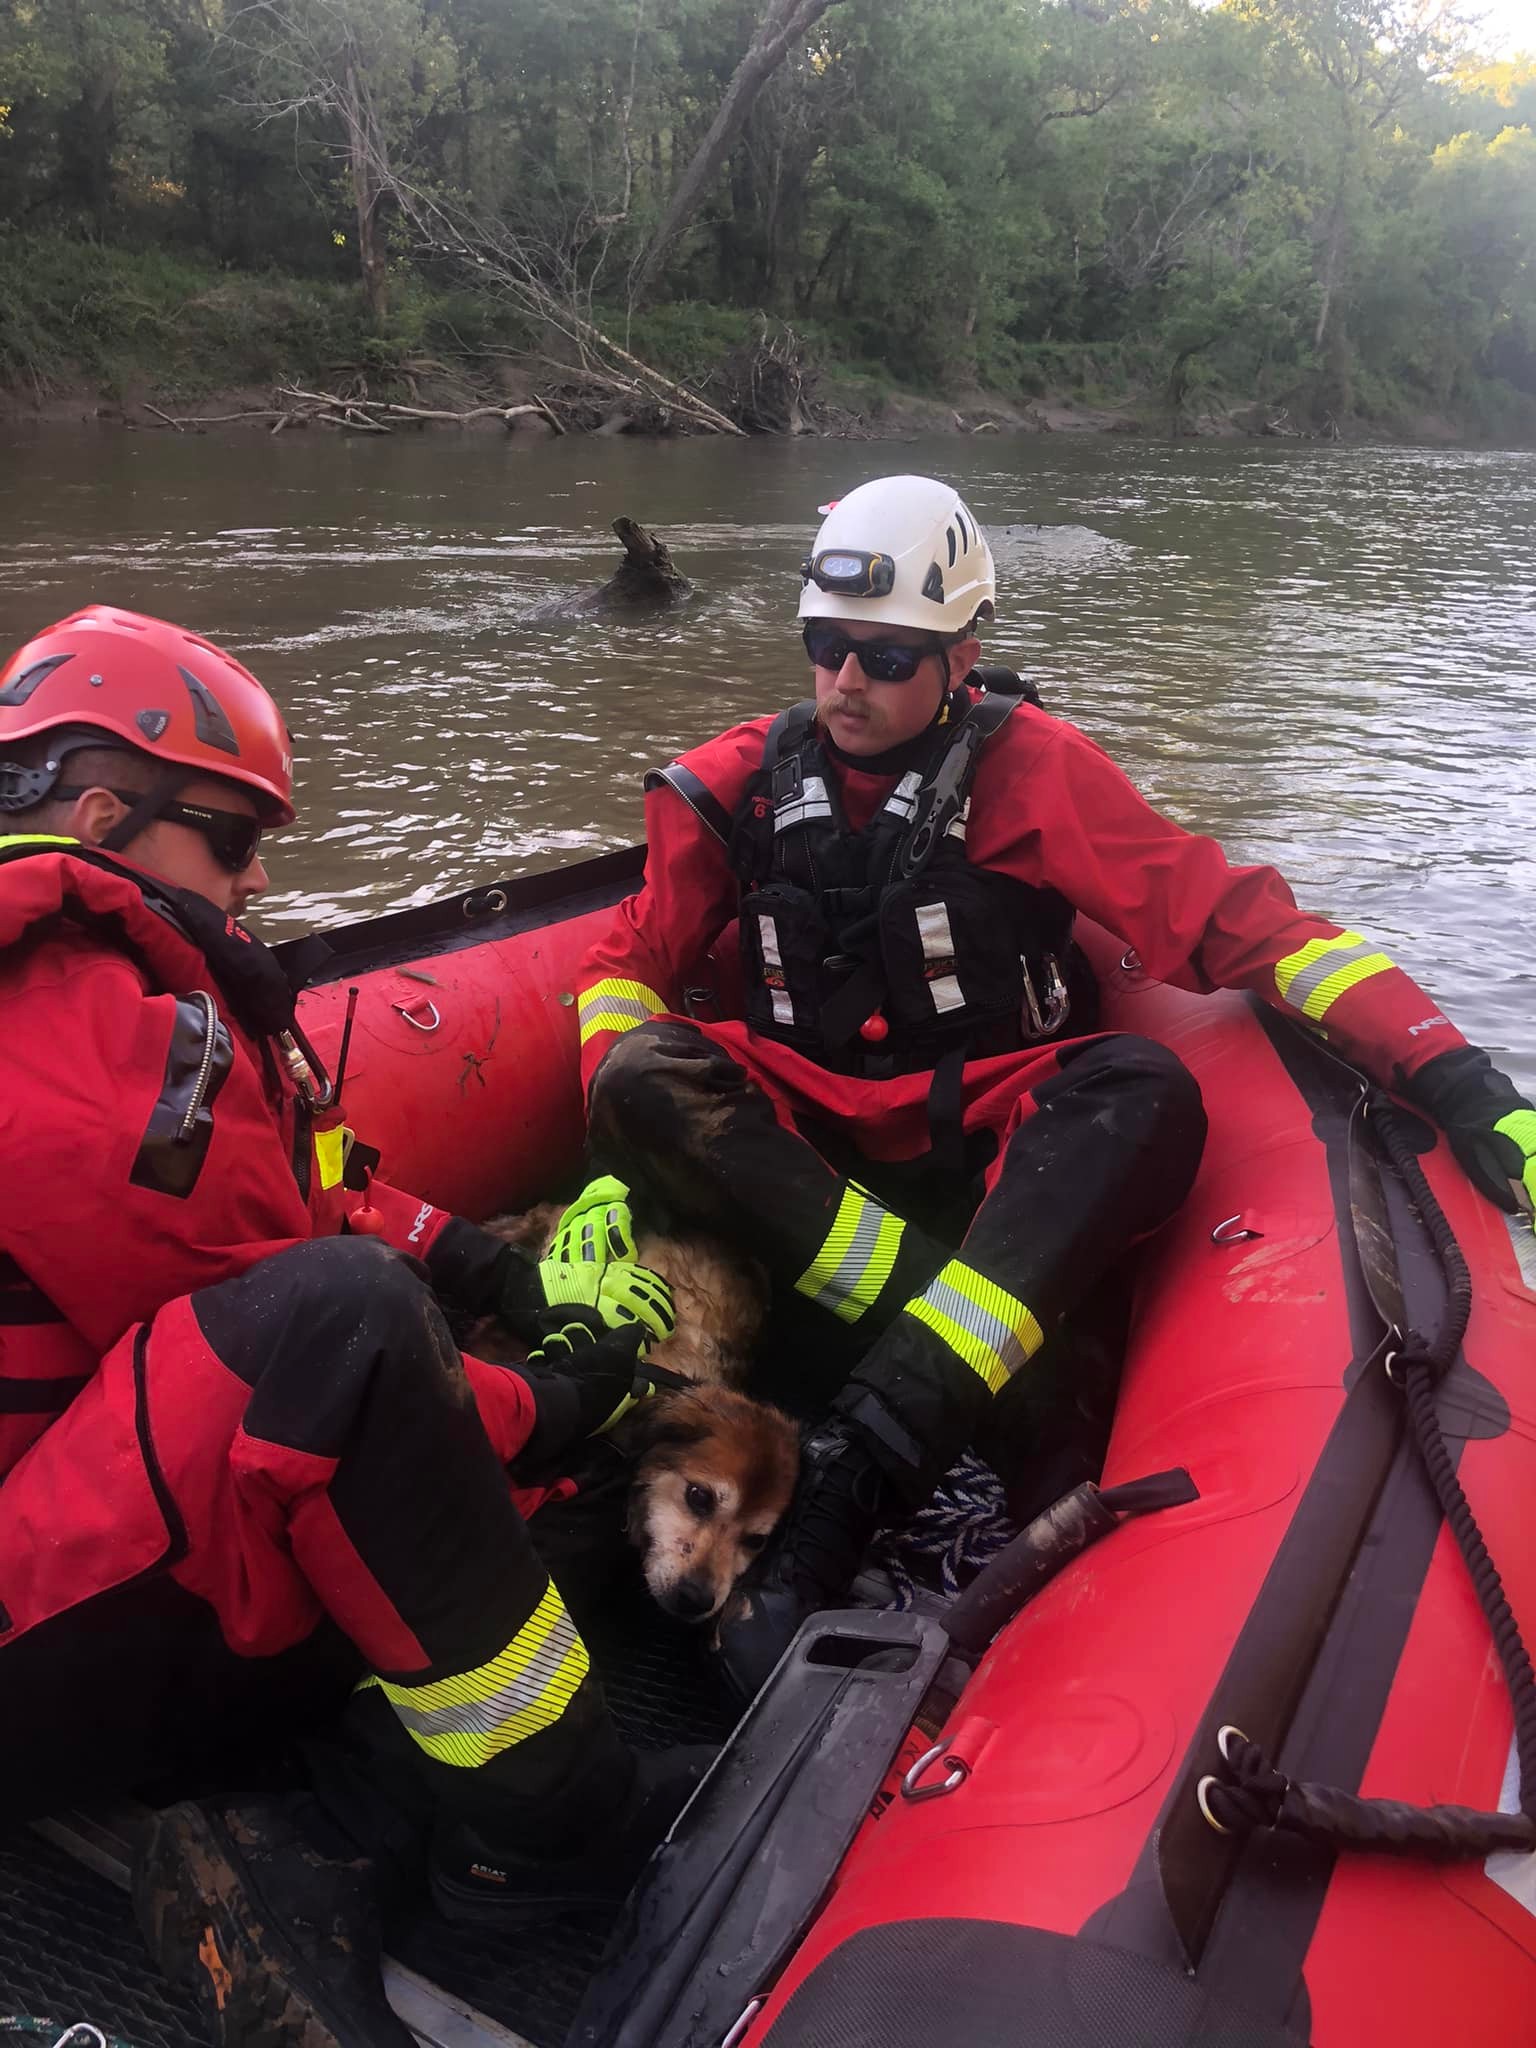 two firefighters from the knightdale fire department sitting in a boat on nesue river. one of them is petting a dog they rescued who is laying on the floor of the boat.